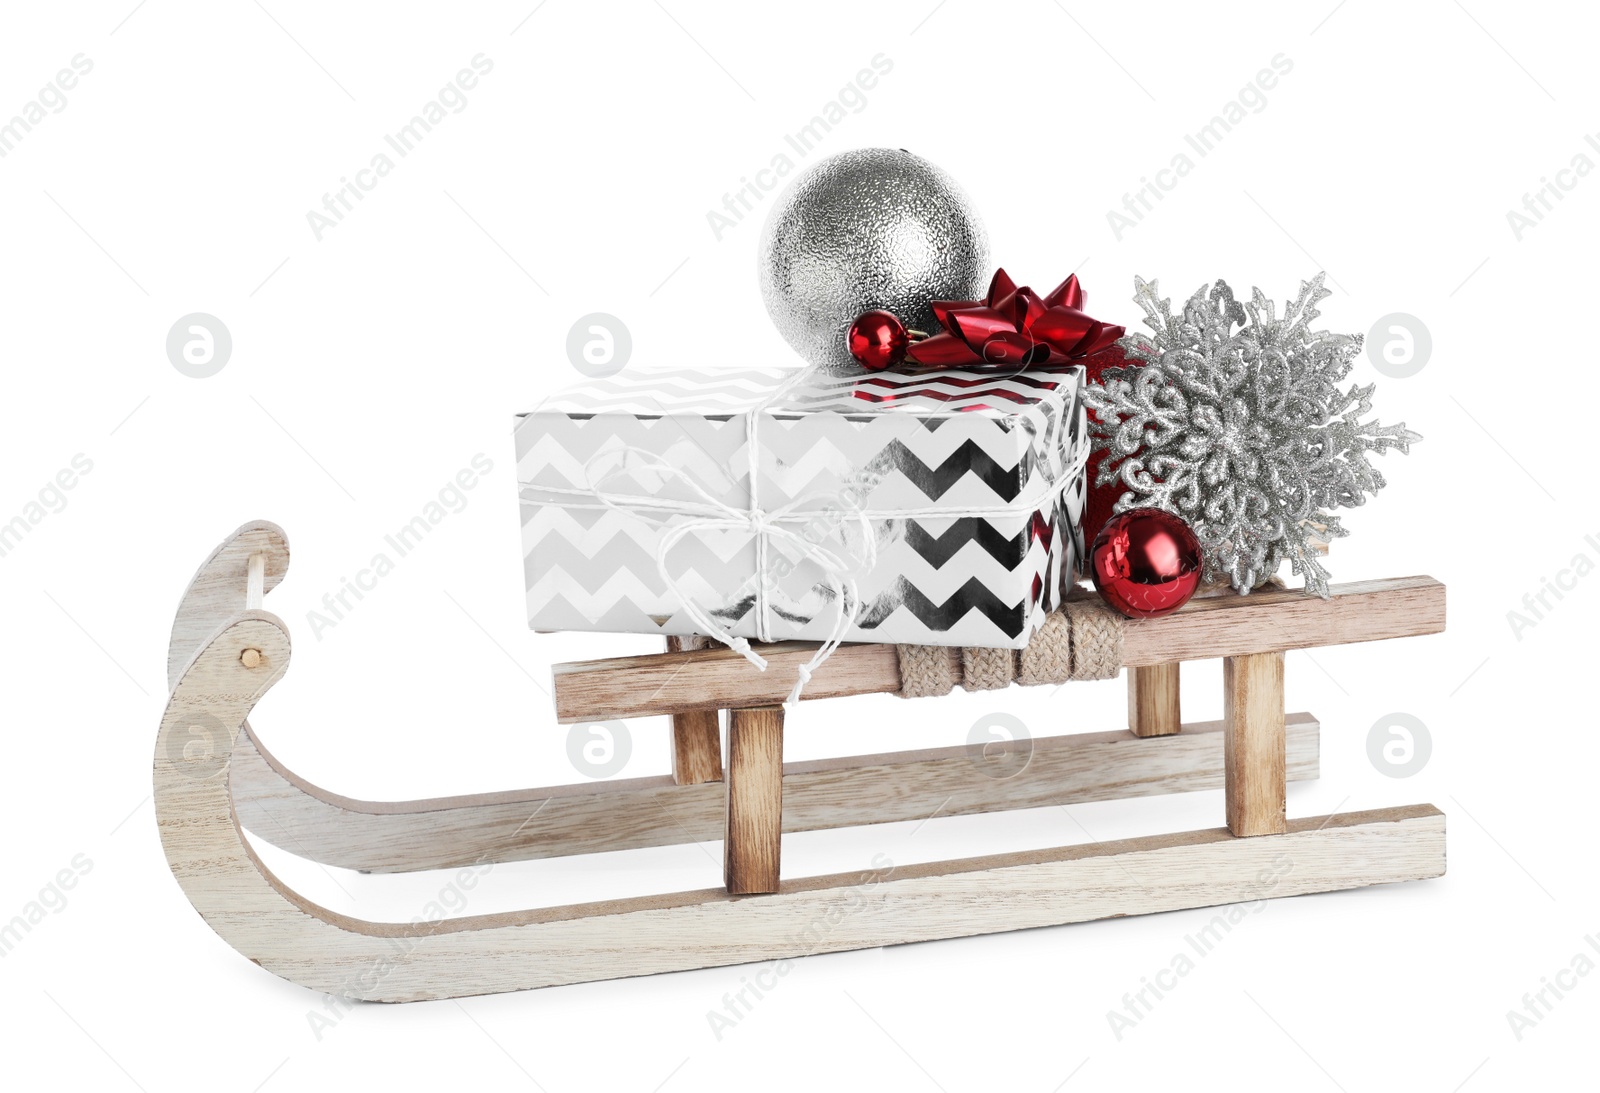 Photo of Wooden sleigh with gift box and Christmas decorations isolated on white